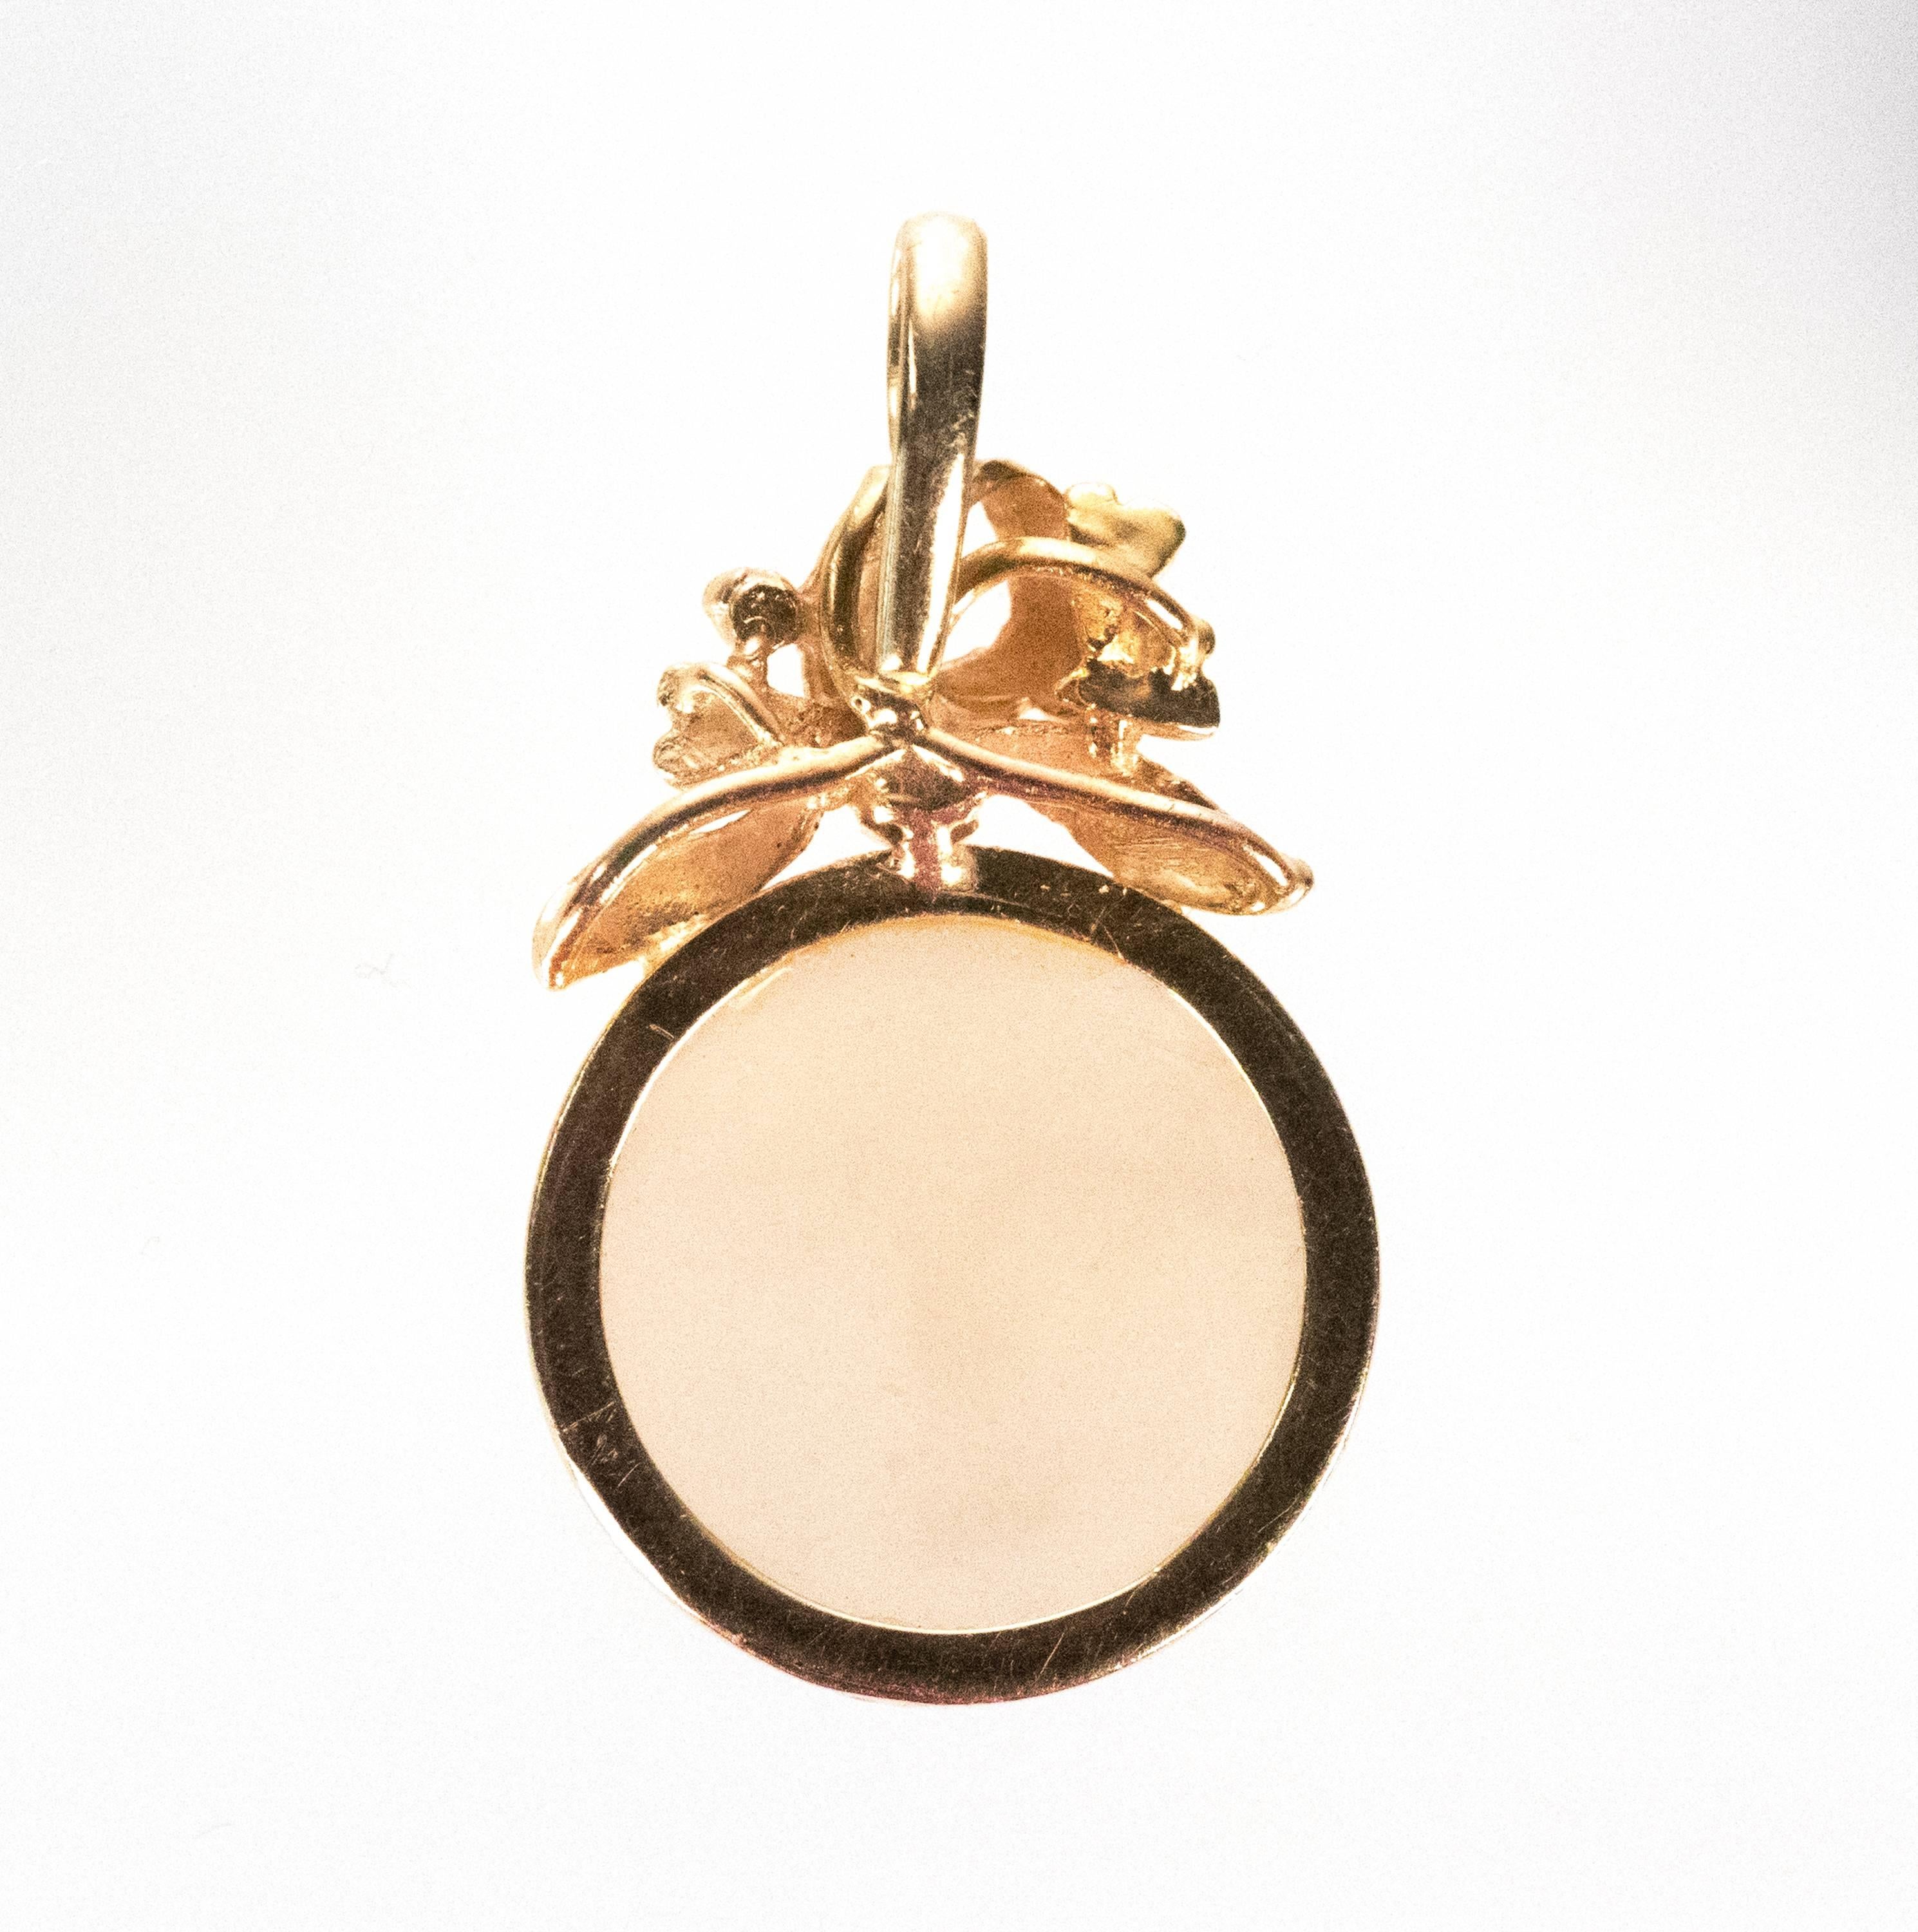 1950s Carved Moon Face Pendant - 18K Yellow Gold, Moonstone

Features a translucent Moonstone cabochon with a hand carved Moon Face front. This gorgeous Moonstone is set in rich 18 Karat Yellow Gold. The top of the frame has a ribbon motif with